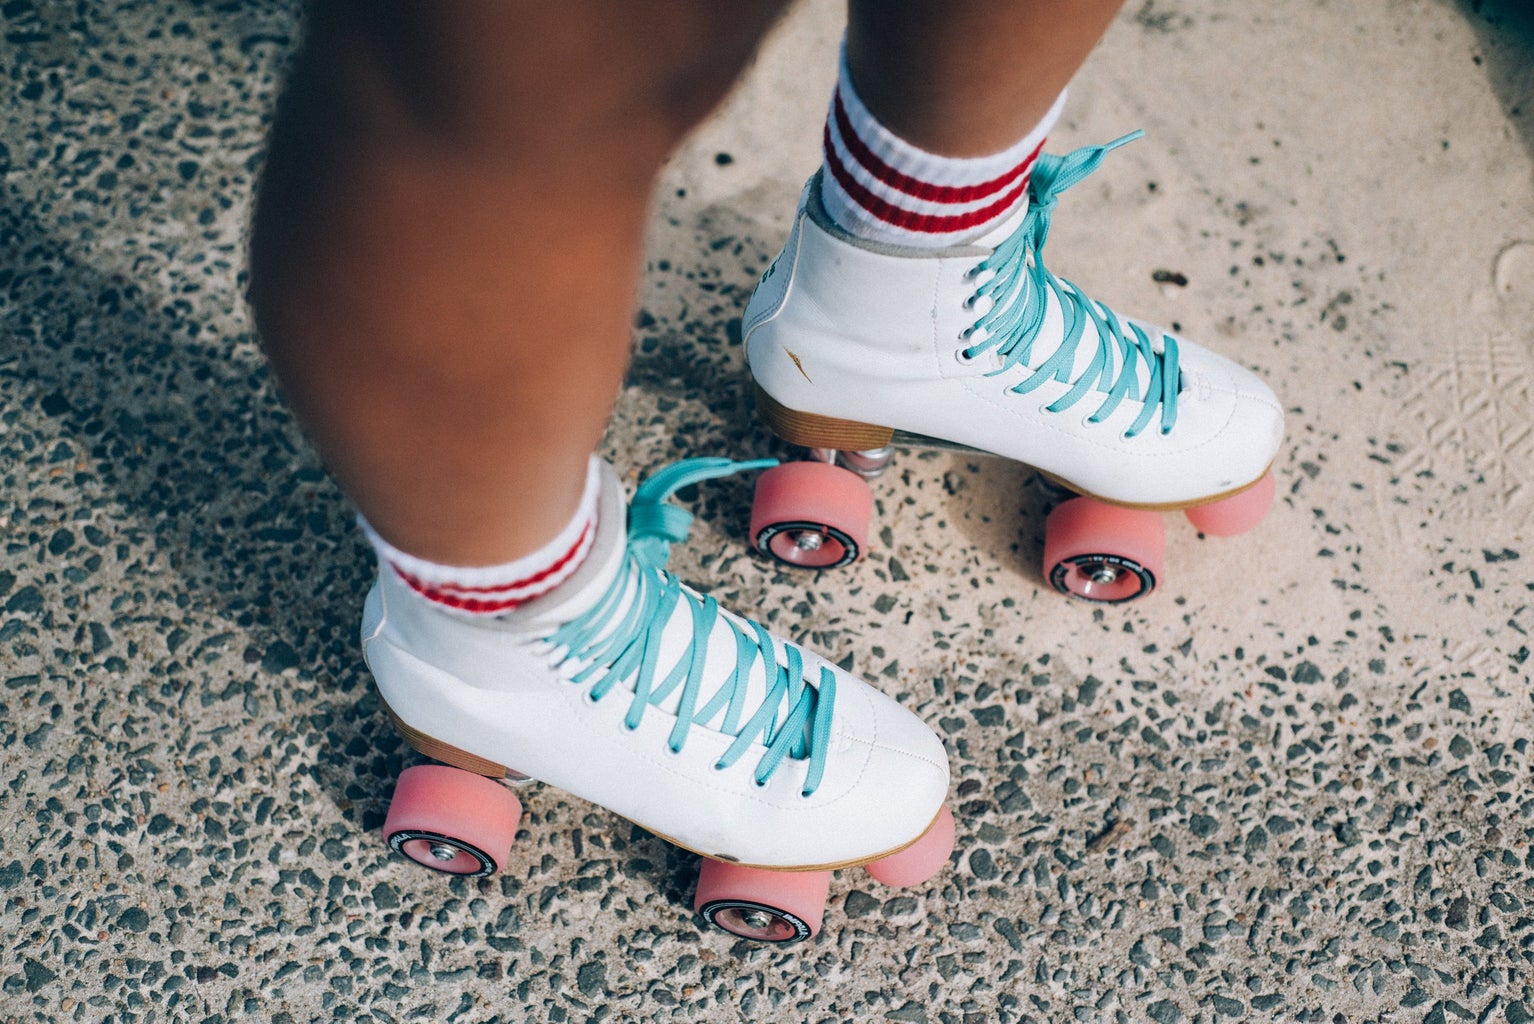 Woman wearing pink and white roller skates.